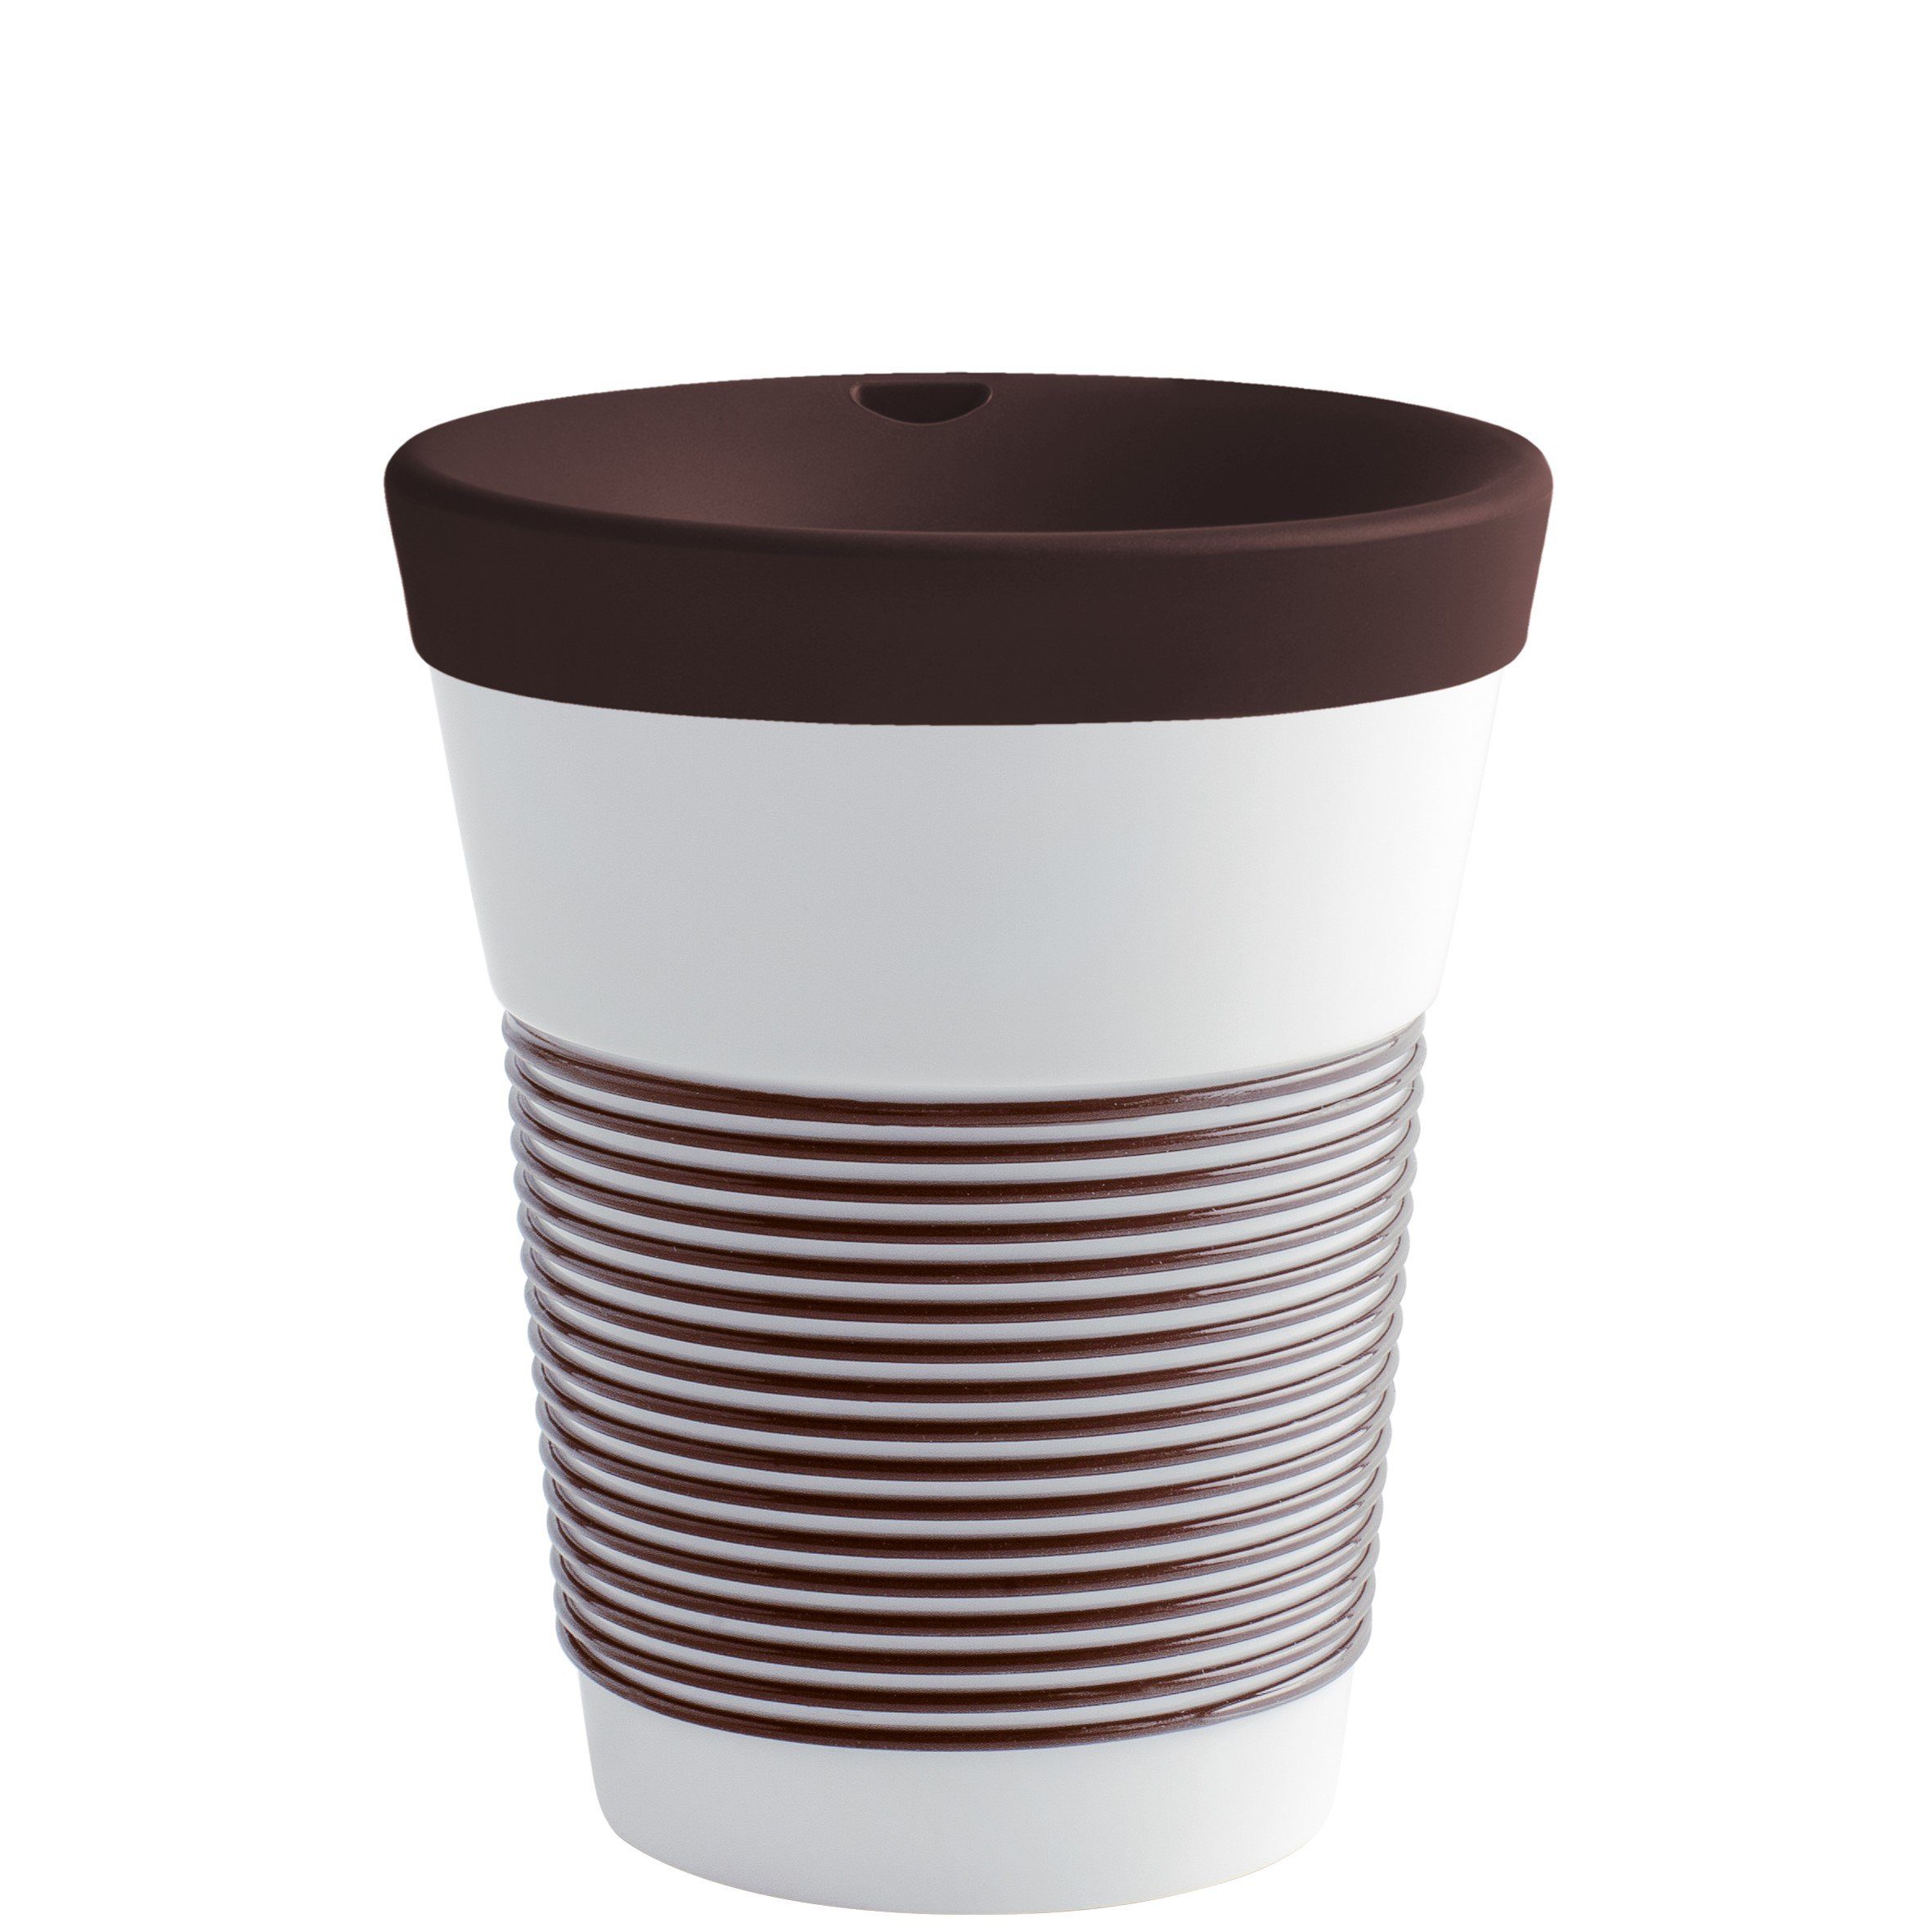 Kahla Coffee-to-go-Becher cupit 0,35 l, Porzellan, Made in Germany